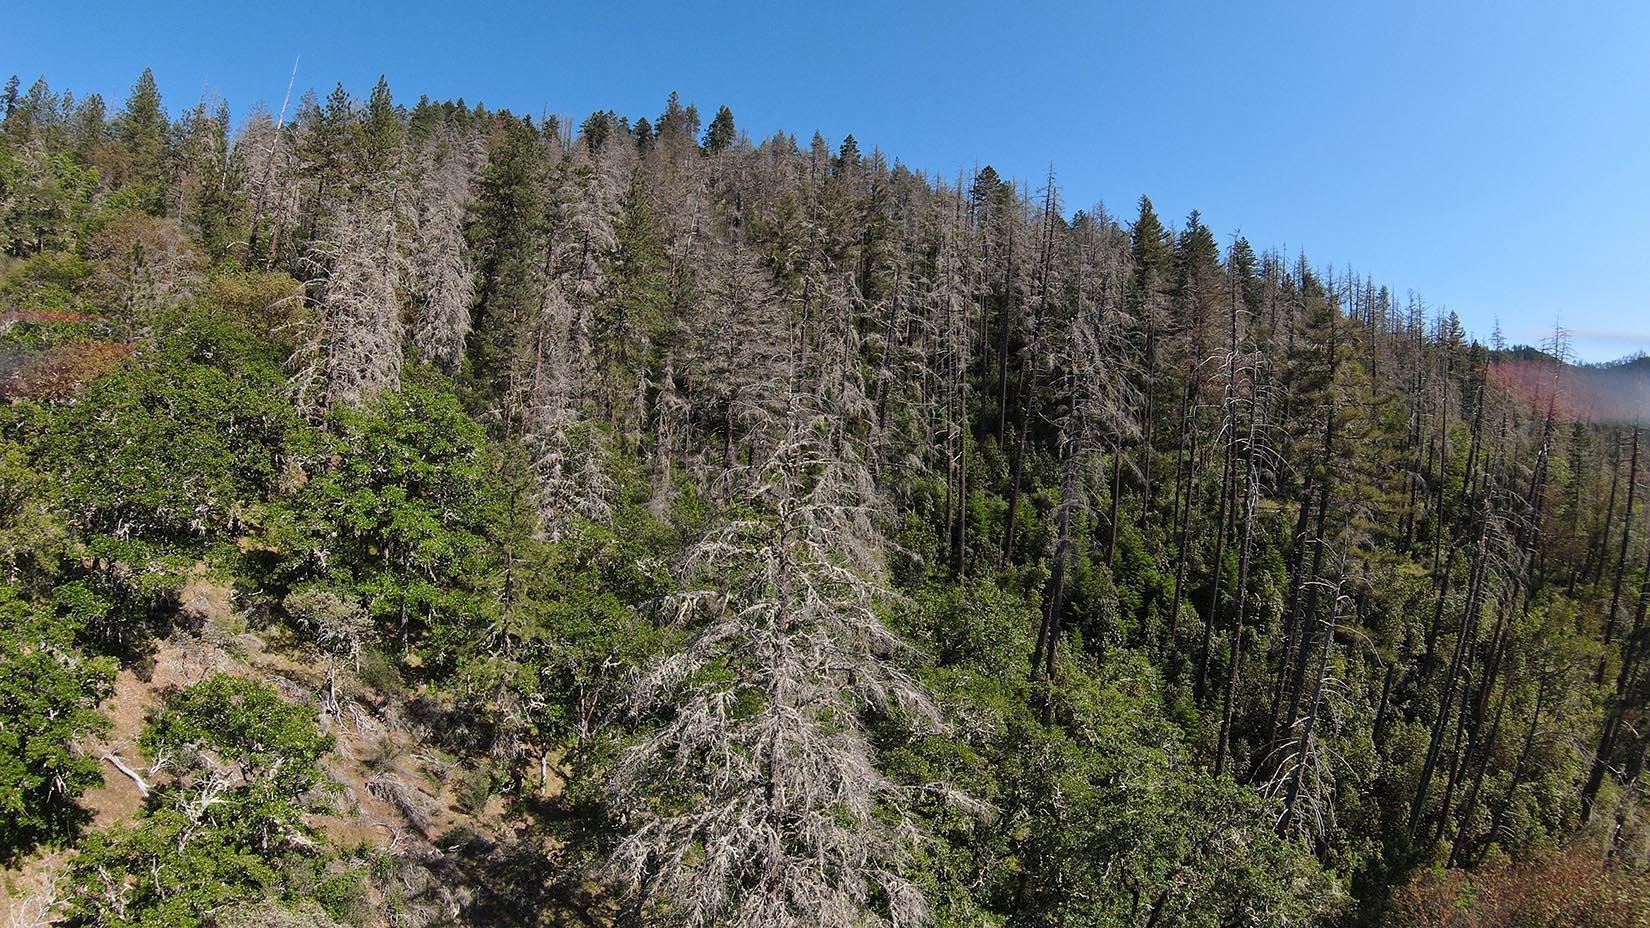 Bare conifers on a hillside, aerial view